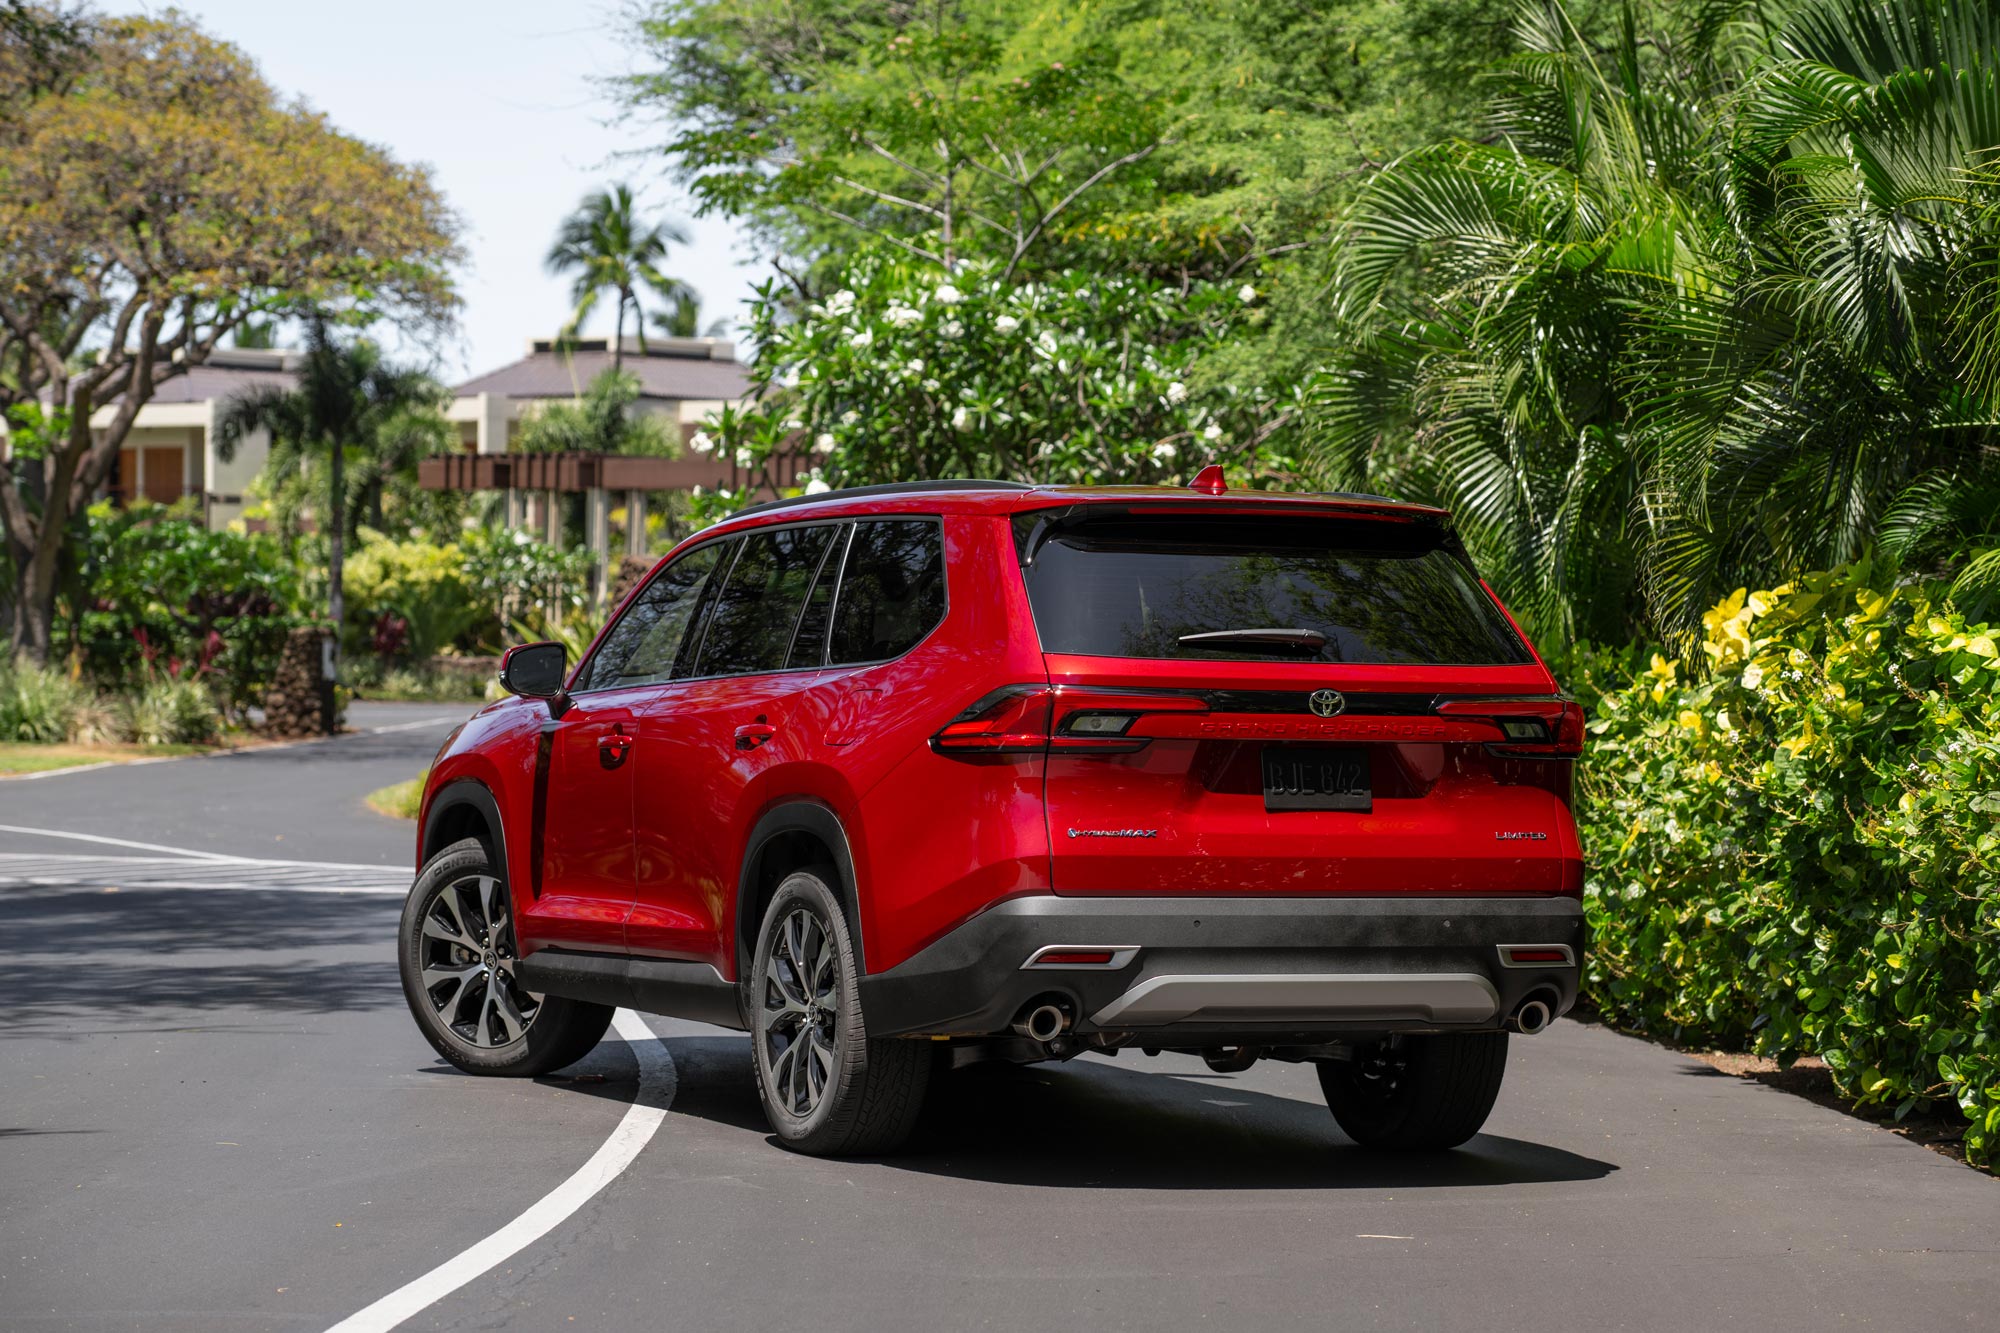 2024 Toyota Grand Highlander in red parked near plants and bushes.